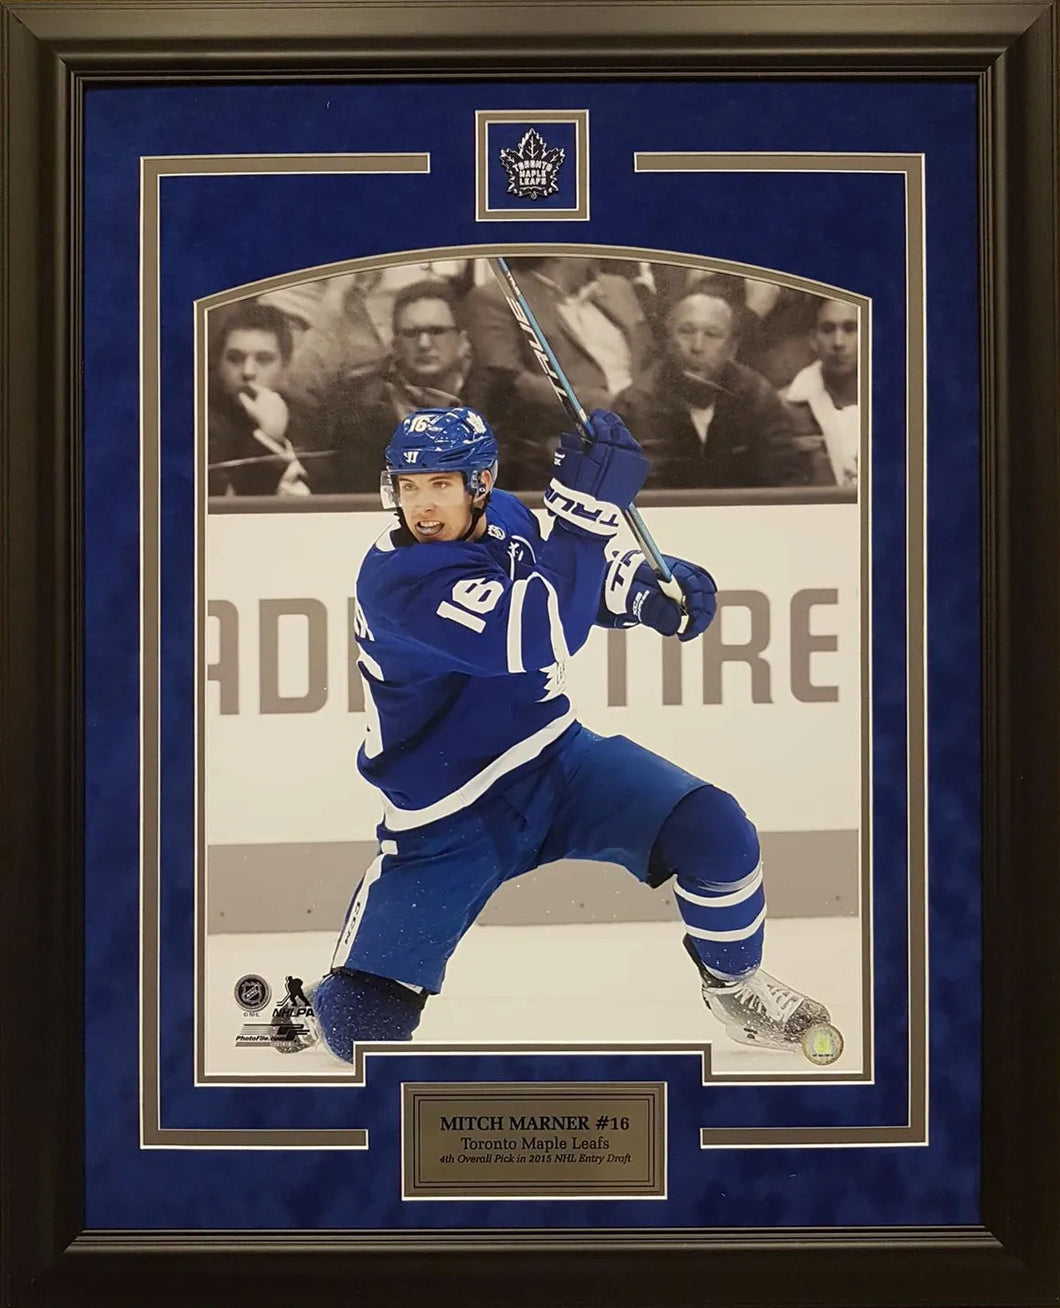 Mitch Marner 16 x 20 Photo, Pin, and Nameplate